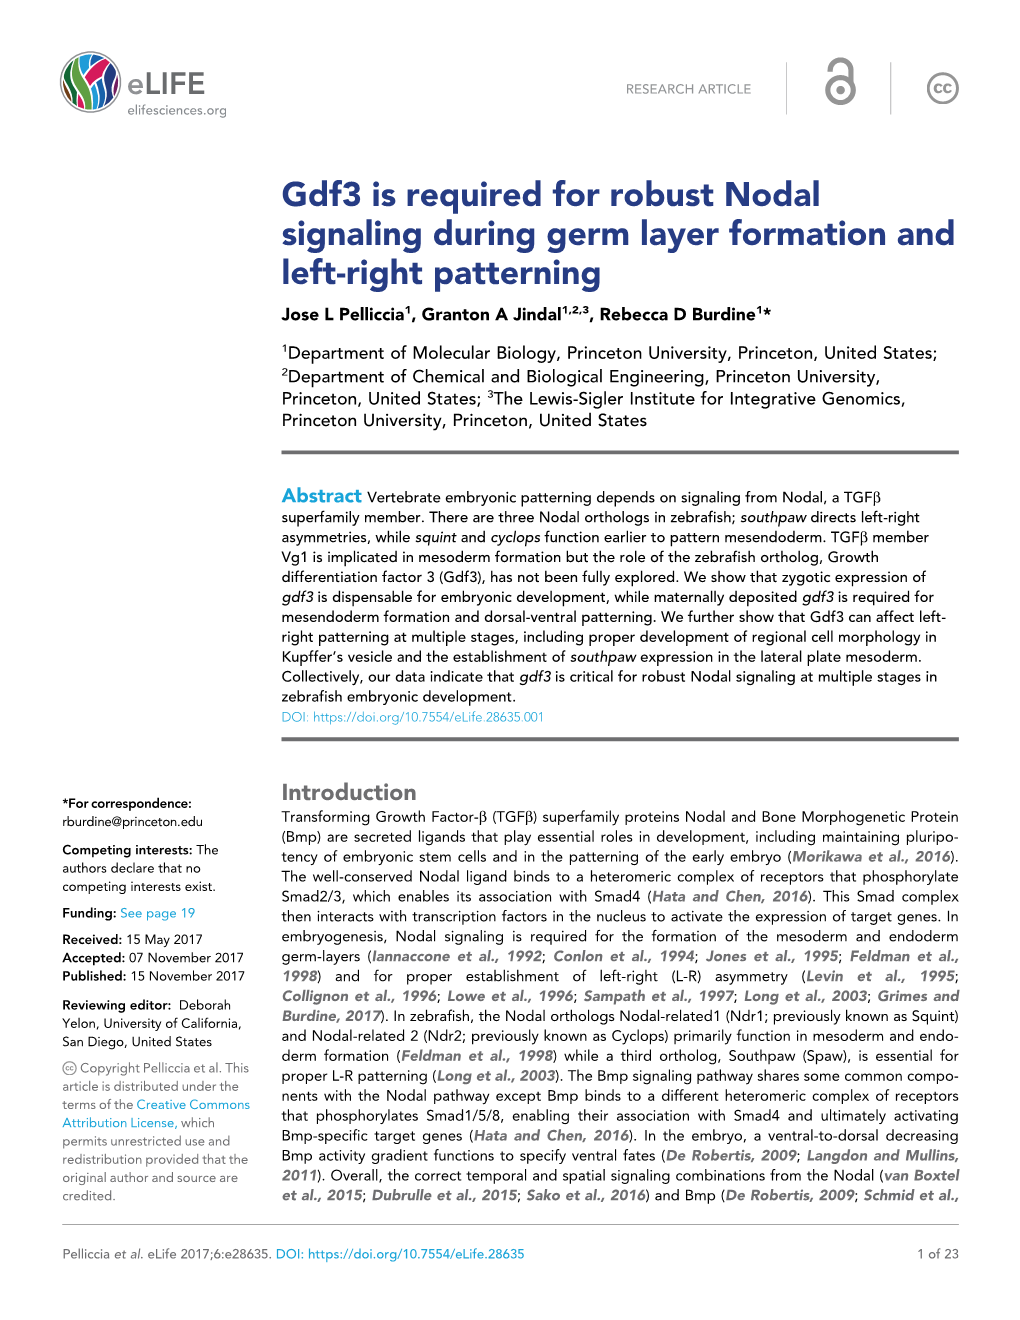 Gdf3 Is Required for Robust Nodal Signaling During Germ Layer Formation and Left-Right Patterning Jose L Pelliccia1, Granton a Jindal1,2,3, Rebecca D Burdine1*